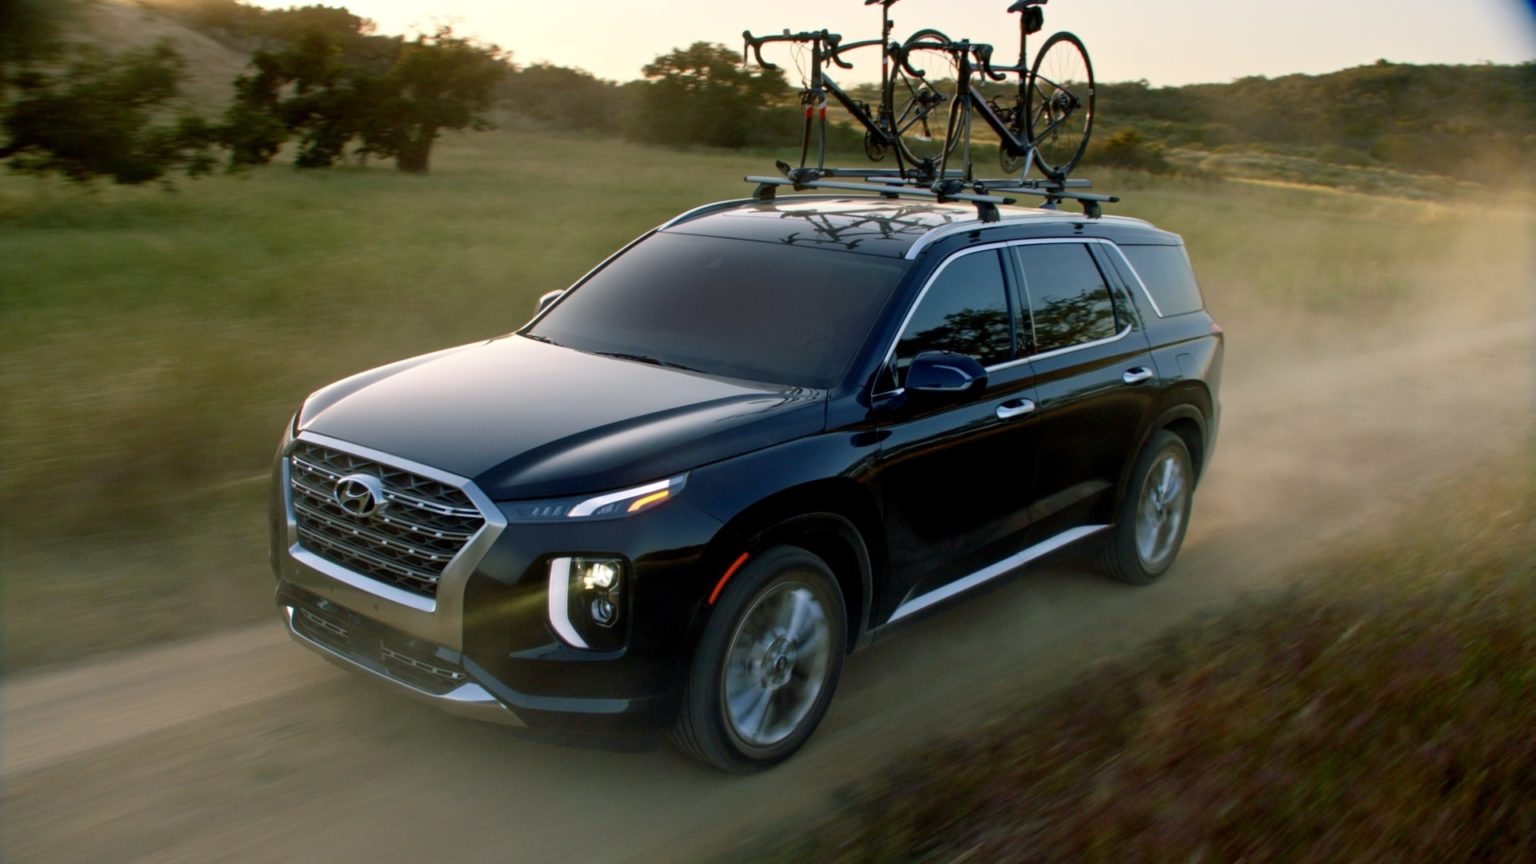 New Hyundai commercials show the 2020 Palisade as being a family adventure vehicle.